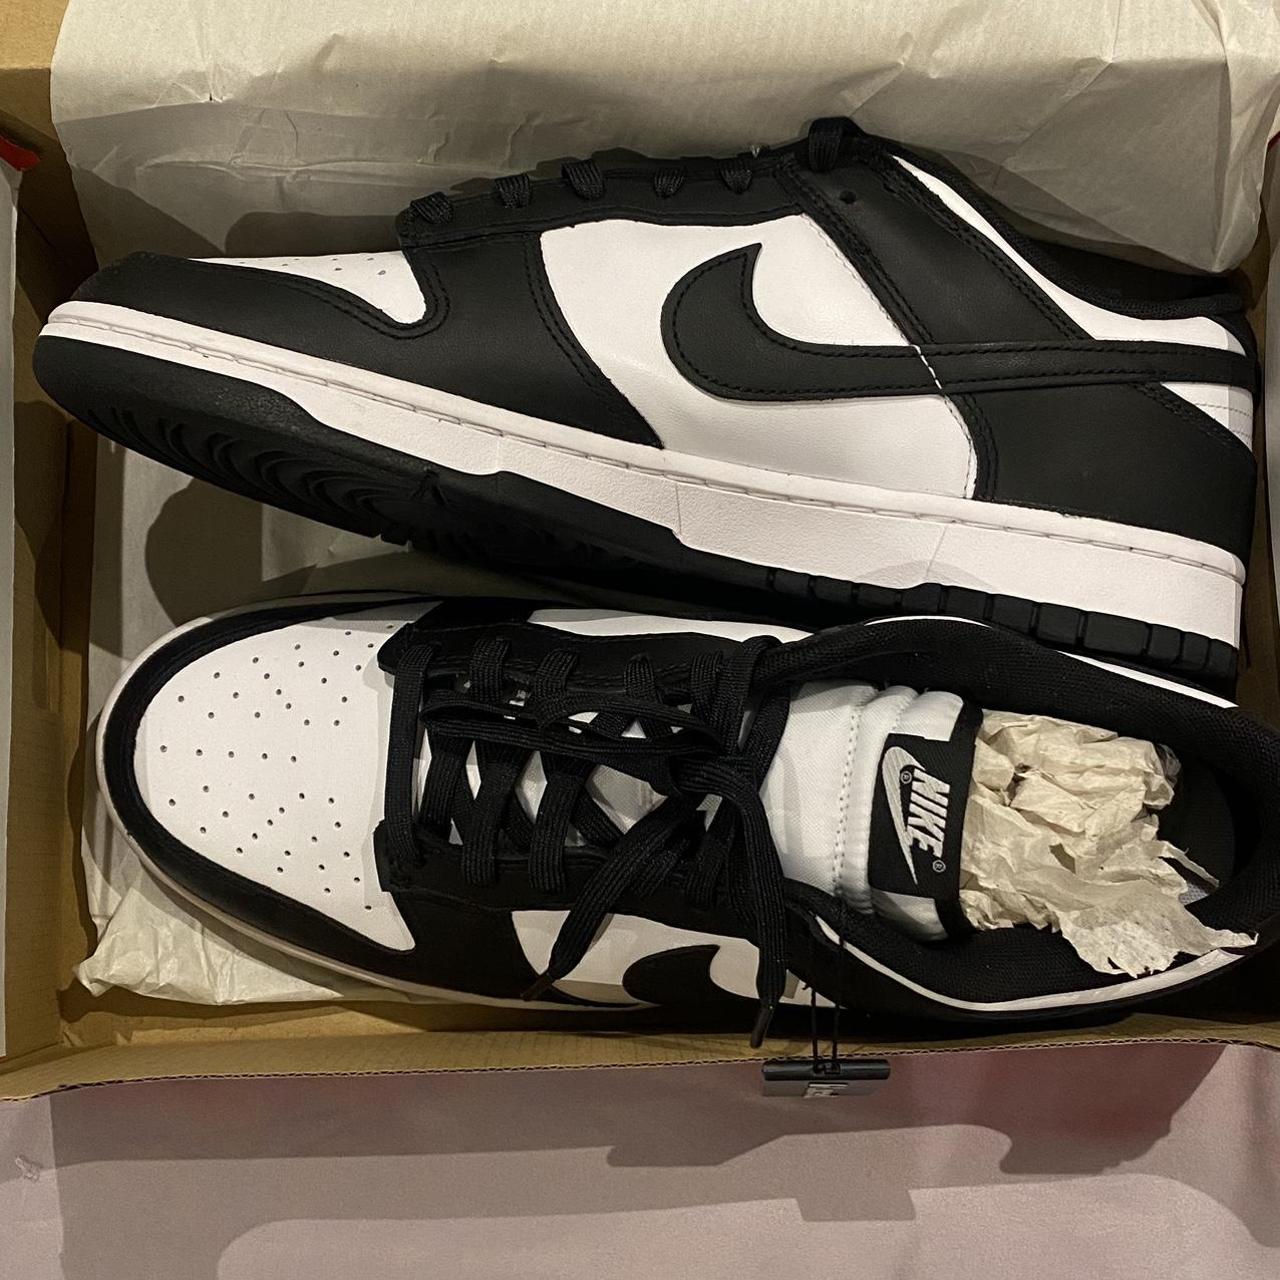 Nike Men's Black and White Trainers | Depop